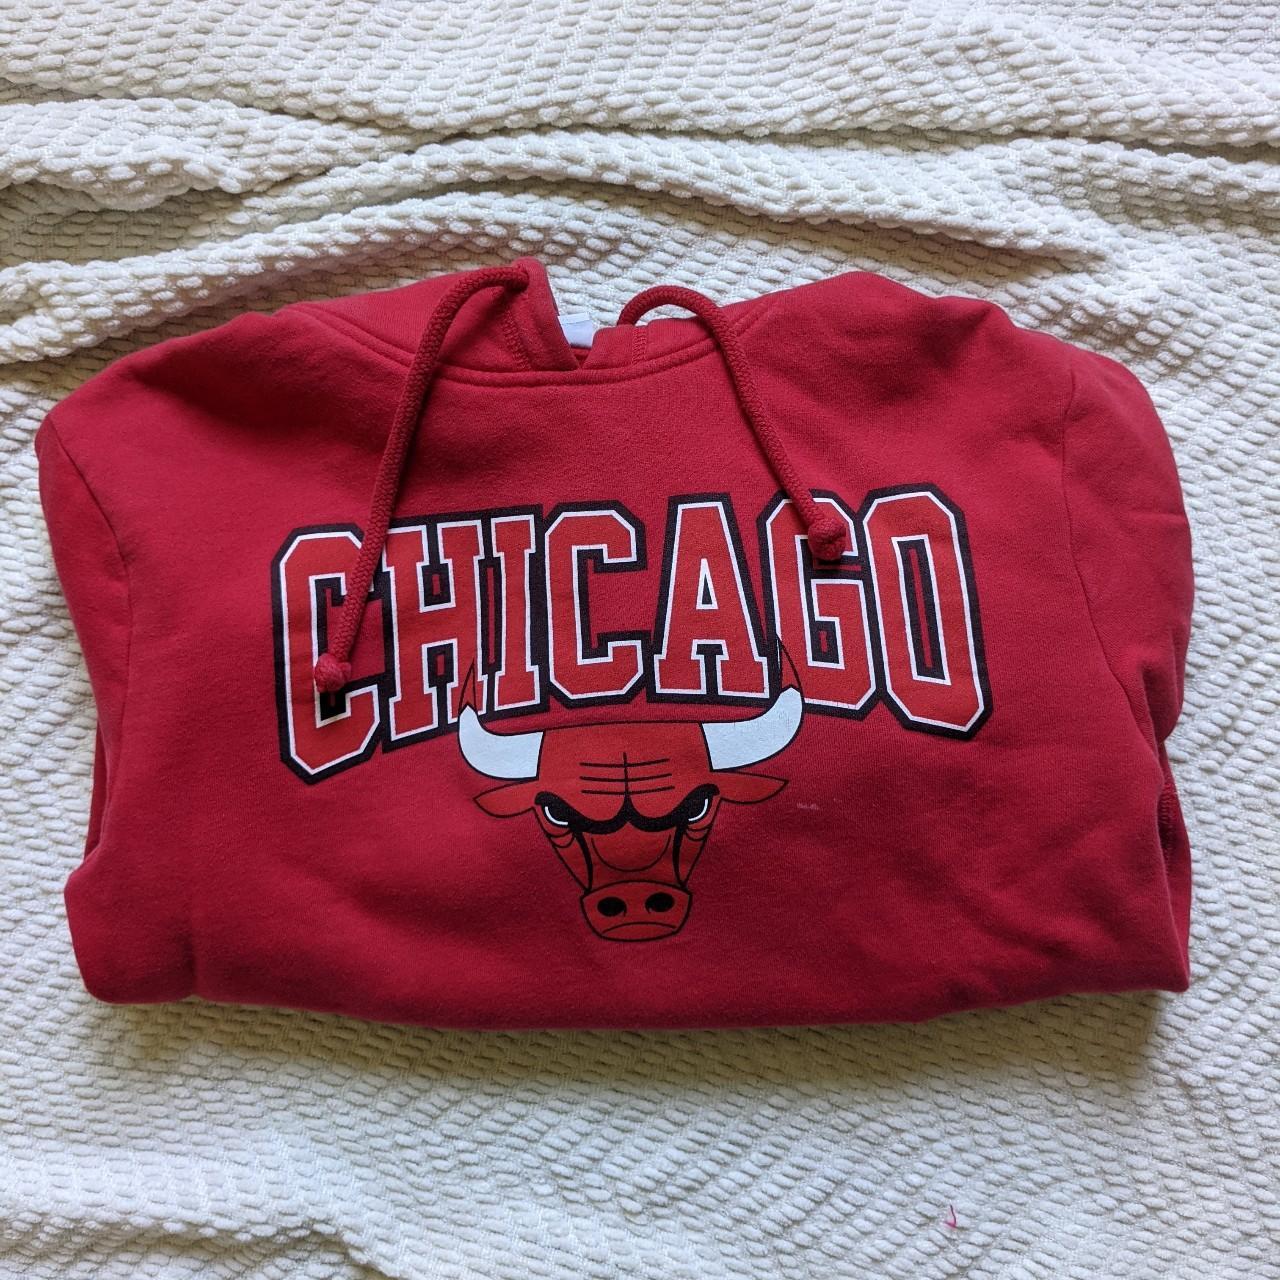 Mitchell & Ness Women's Red and Black Hoodie | Depop